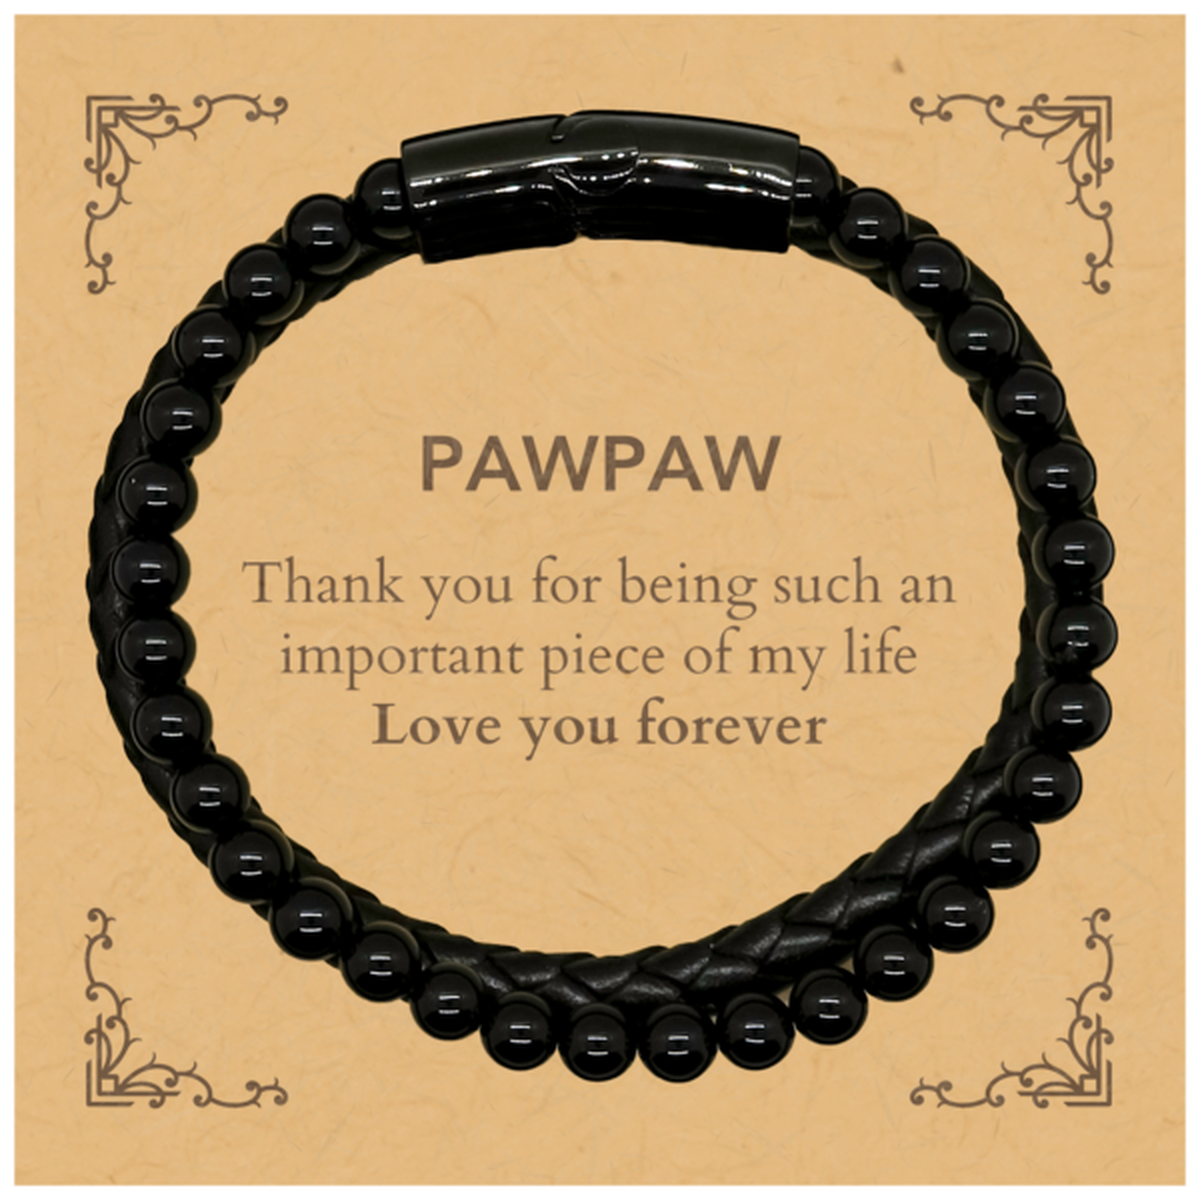 Appropriate Pawpaw Stone Leather Bracelets Epic Birthday Gifts for Pawpaw Thank you for being such an important piece of my life Pawpaw Christmas Mothers Fathers Day